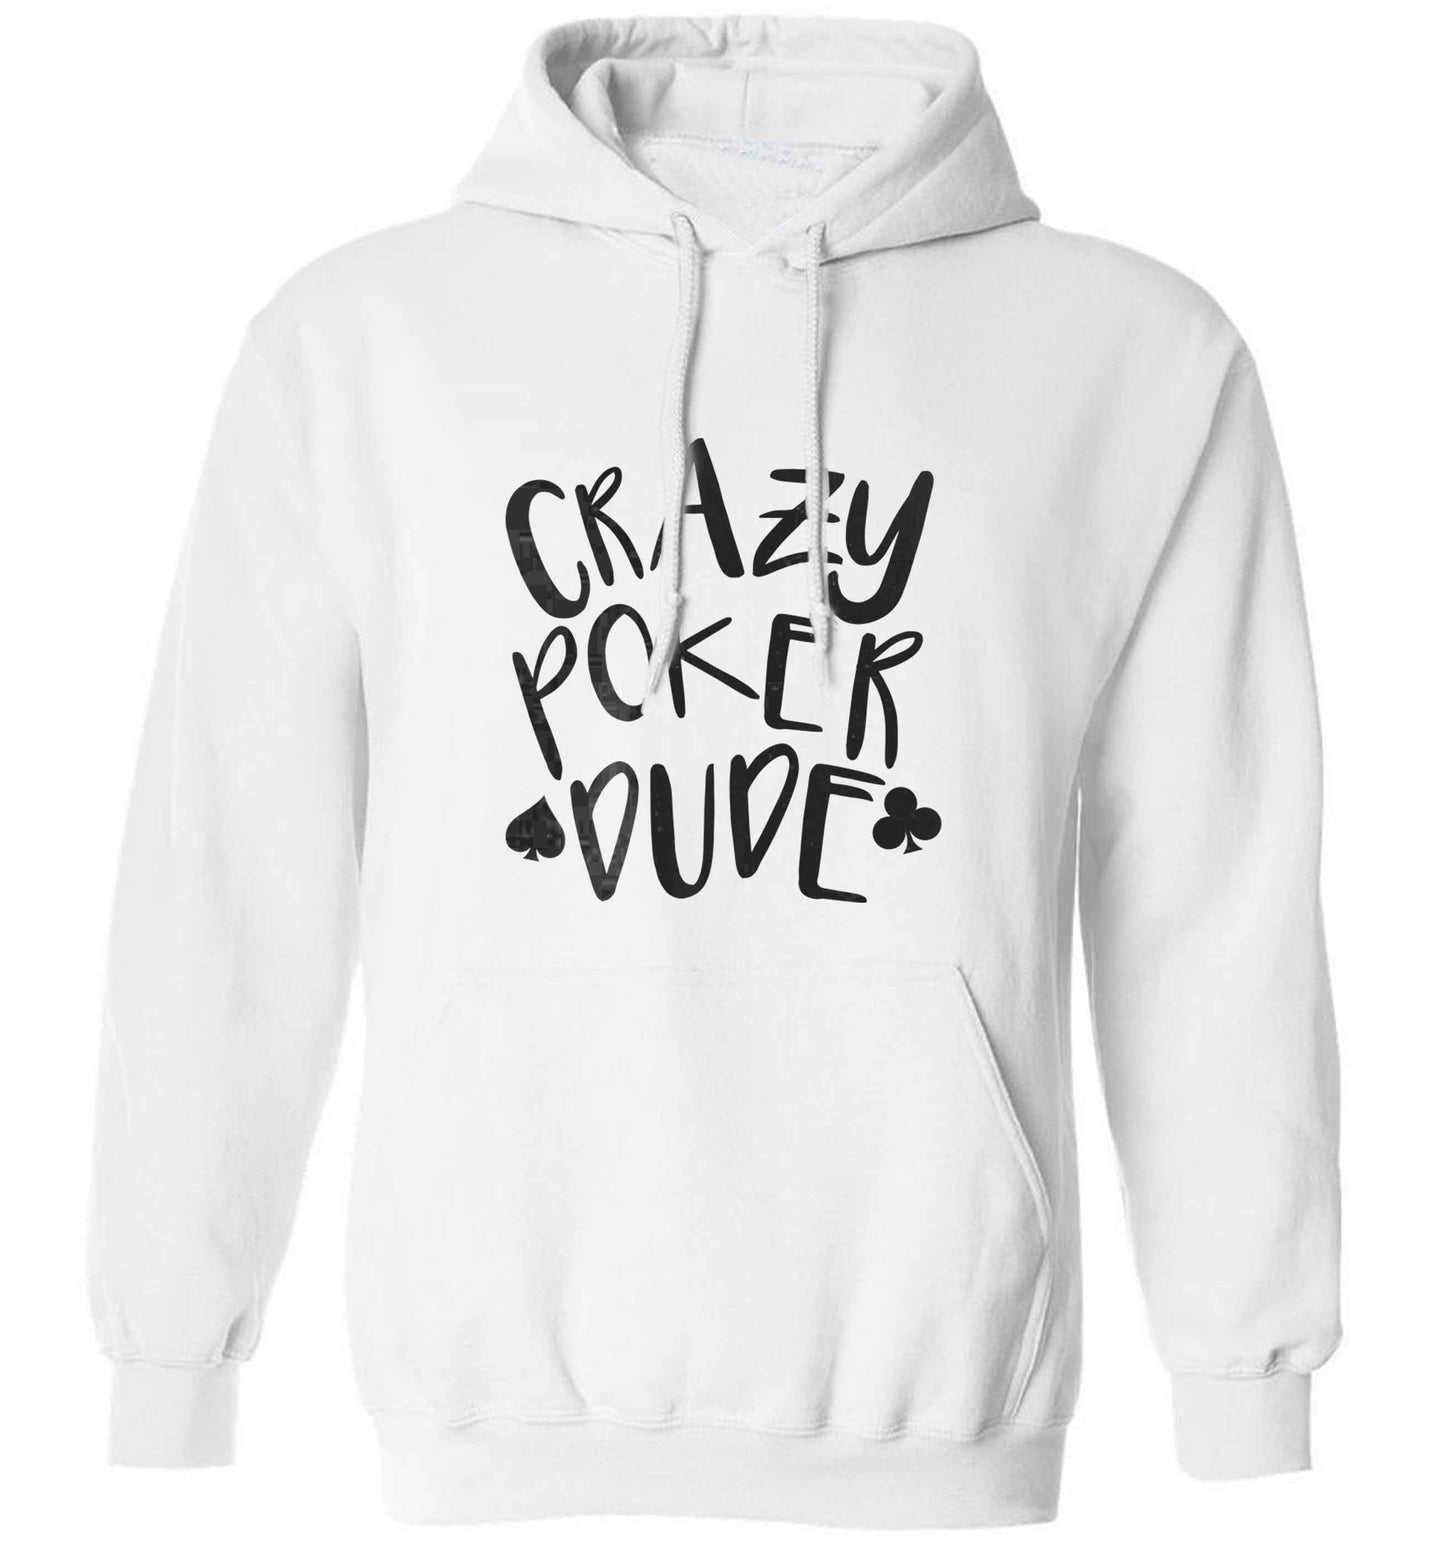 Crazy poker dude adults unisex white hoodie 2XL